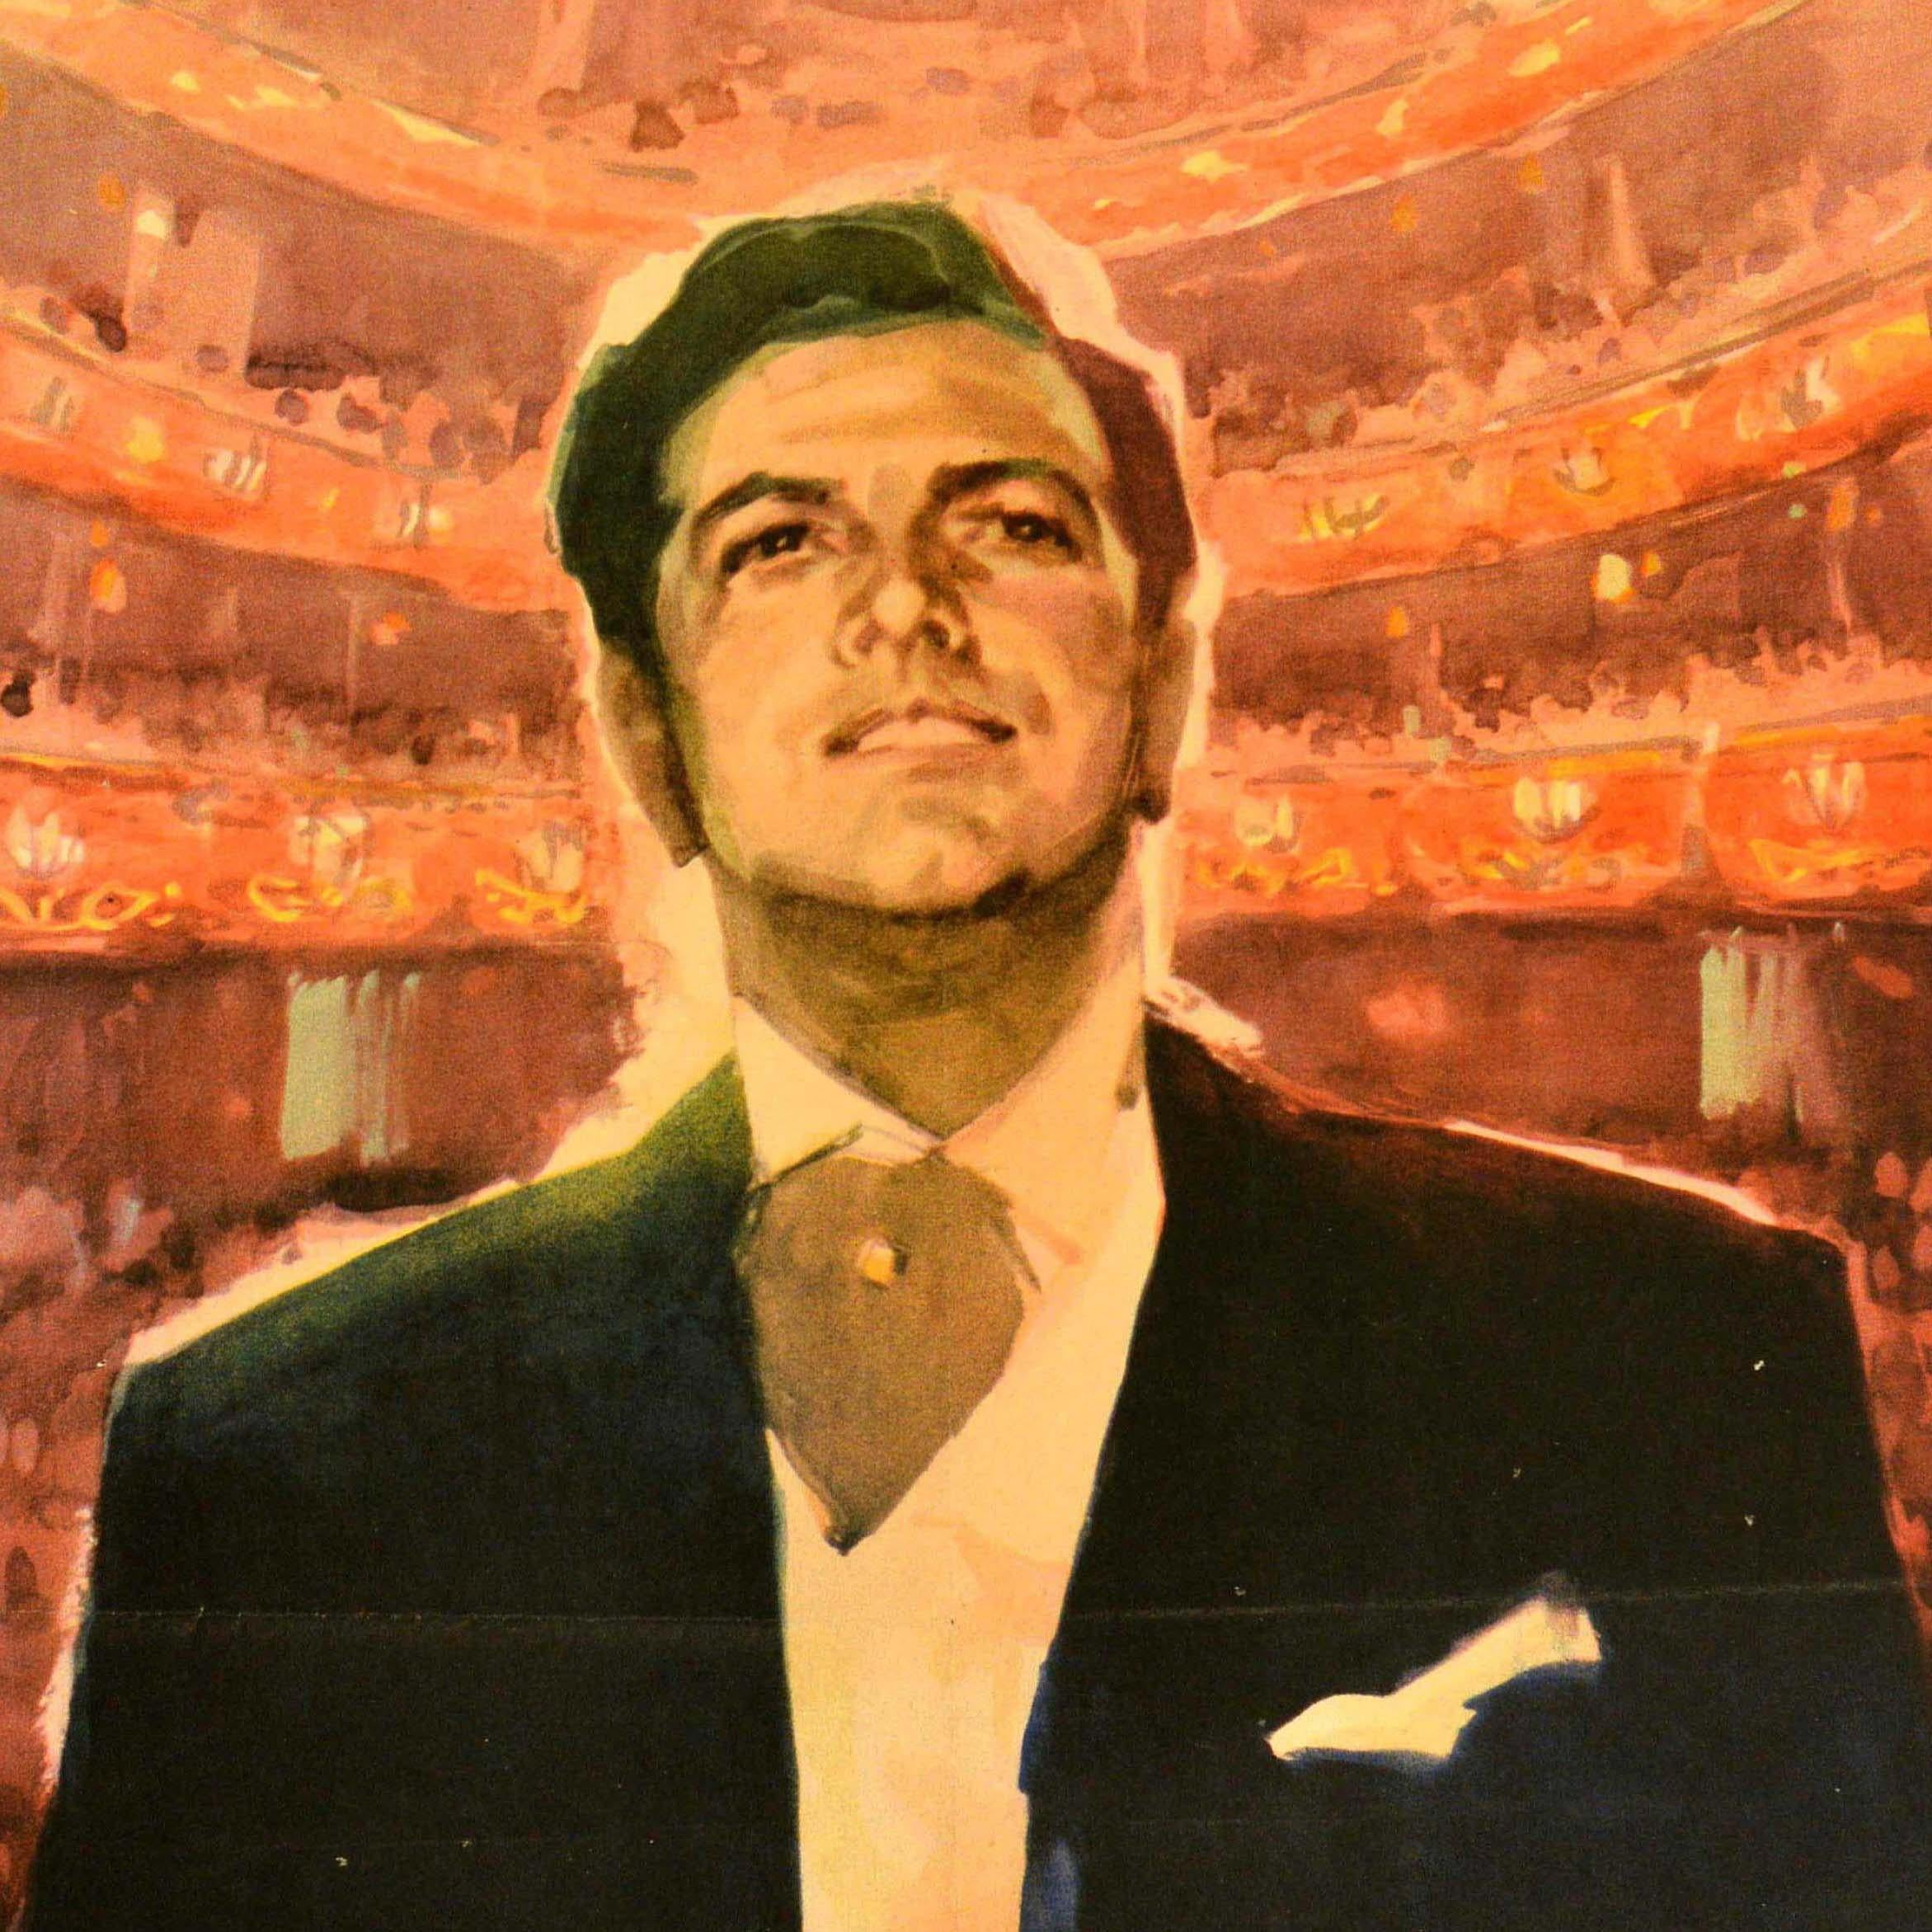 Original Vintage Movie Poster The Great Caruso Mario Lanza Tenor USSR Release - Print by Unknown